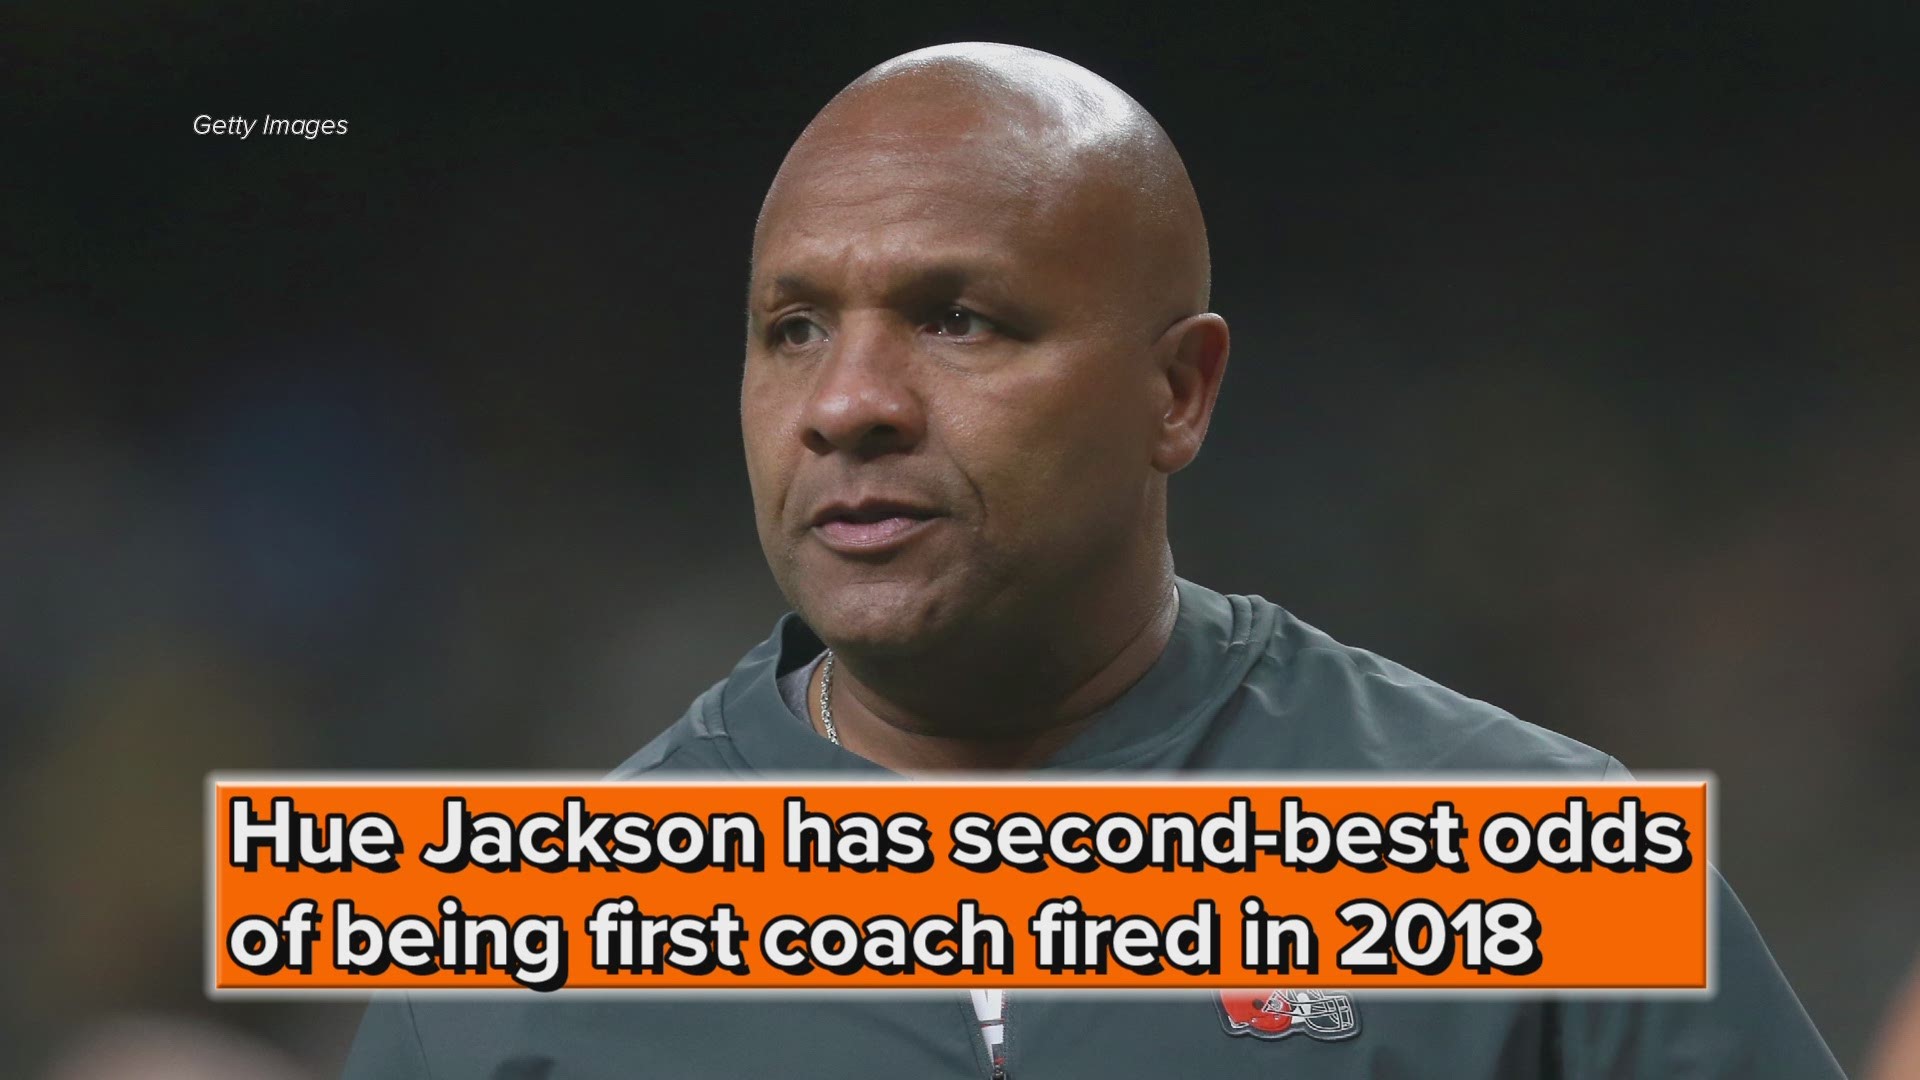 Cleveland Browns' Hue Jackson has second-best odds of being first coach fired in 2018